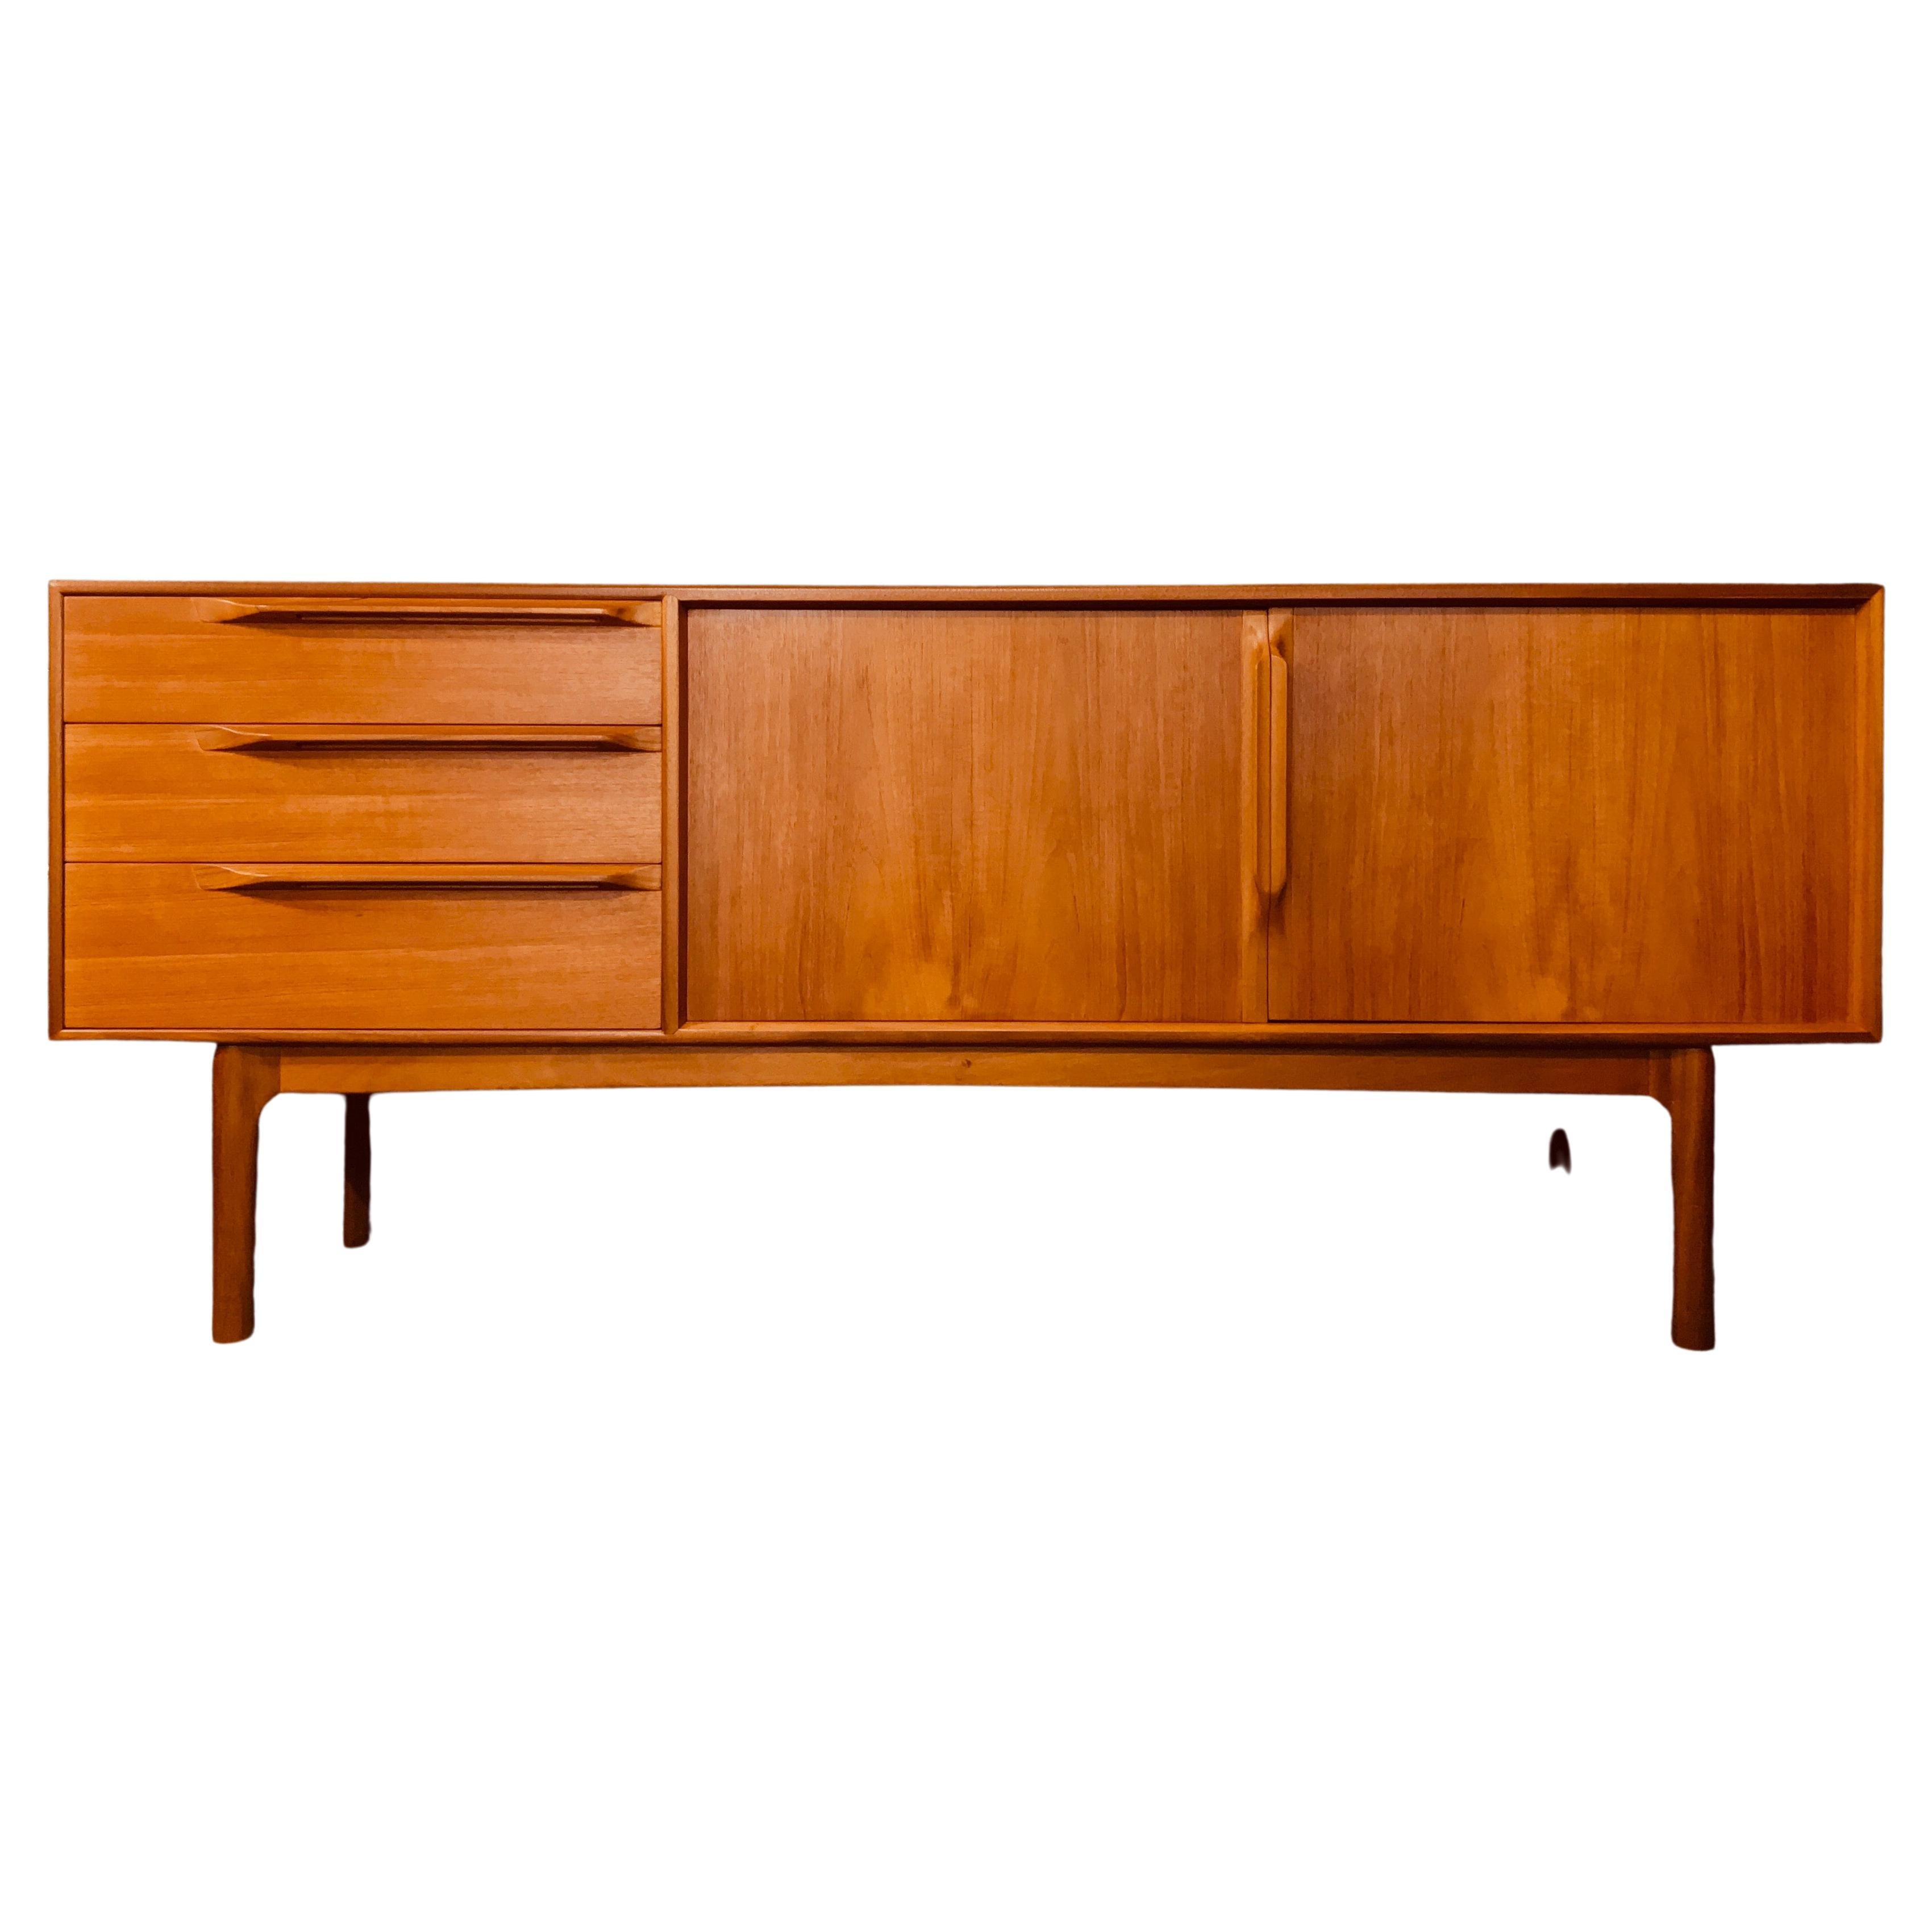 McIntosh teak sideboard, Made in Scotland in the ’70s